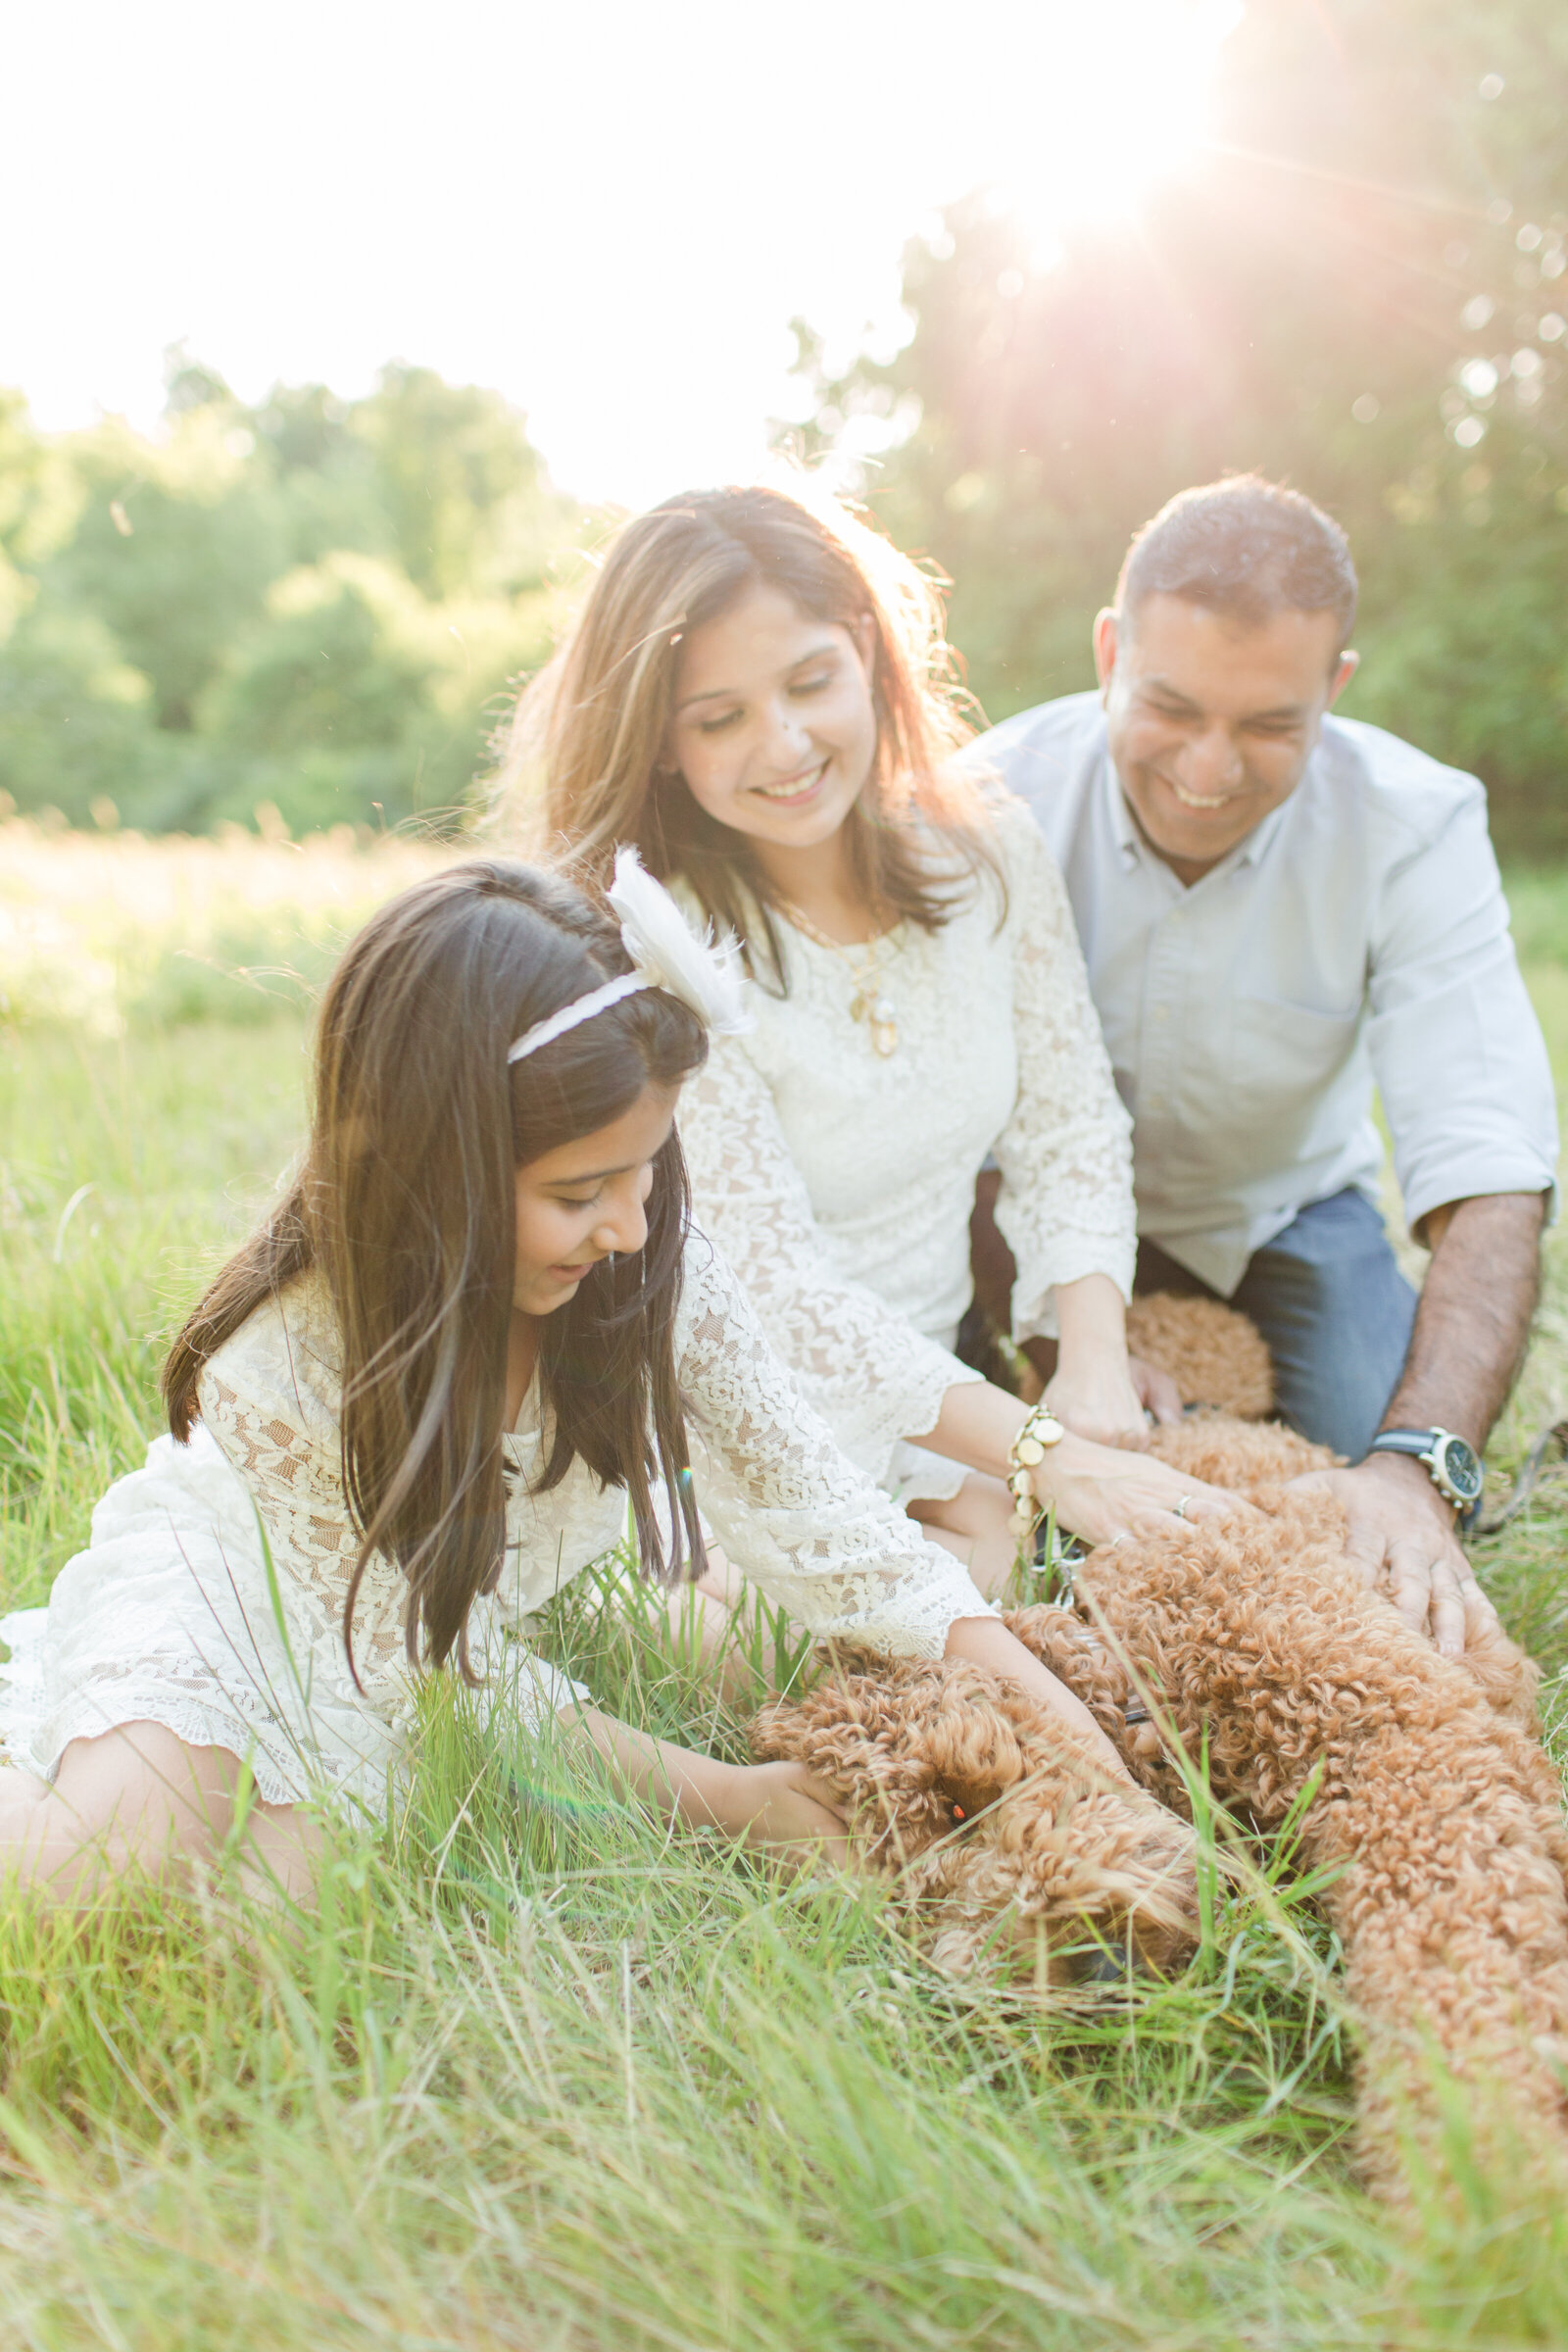 Bright and colorful family photographer based in Metrowest Boston